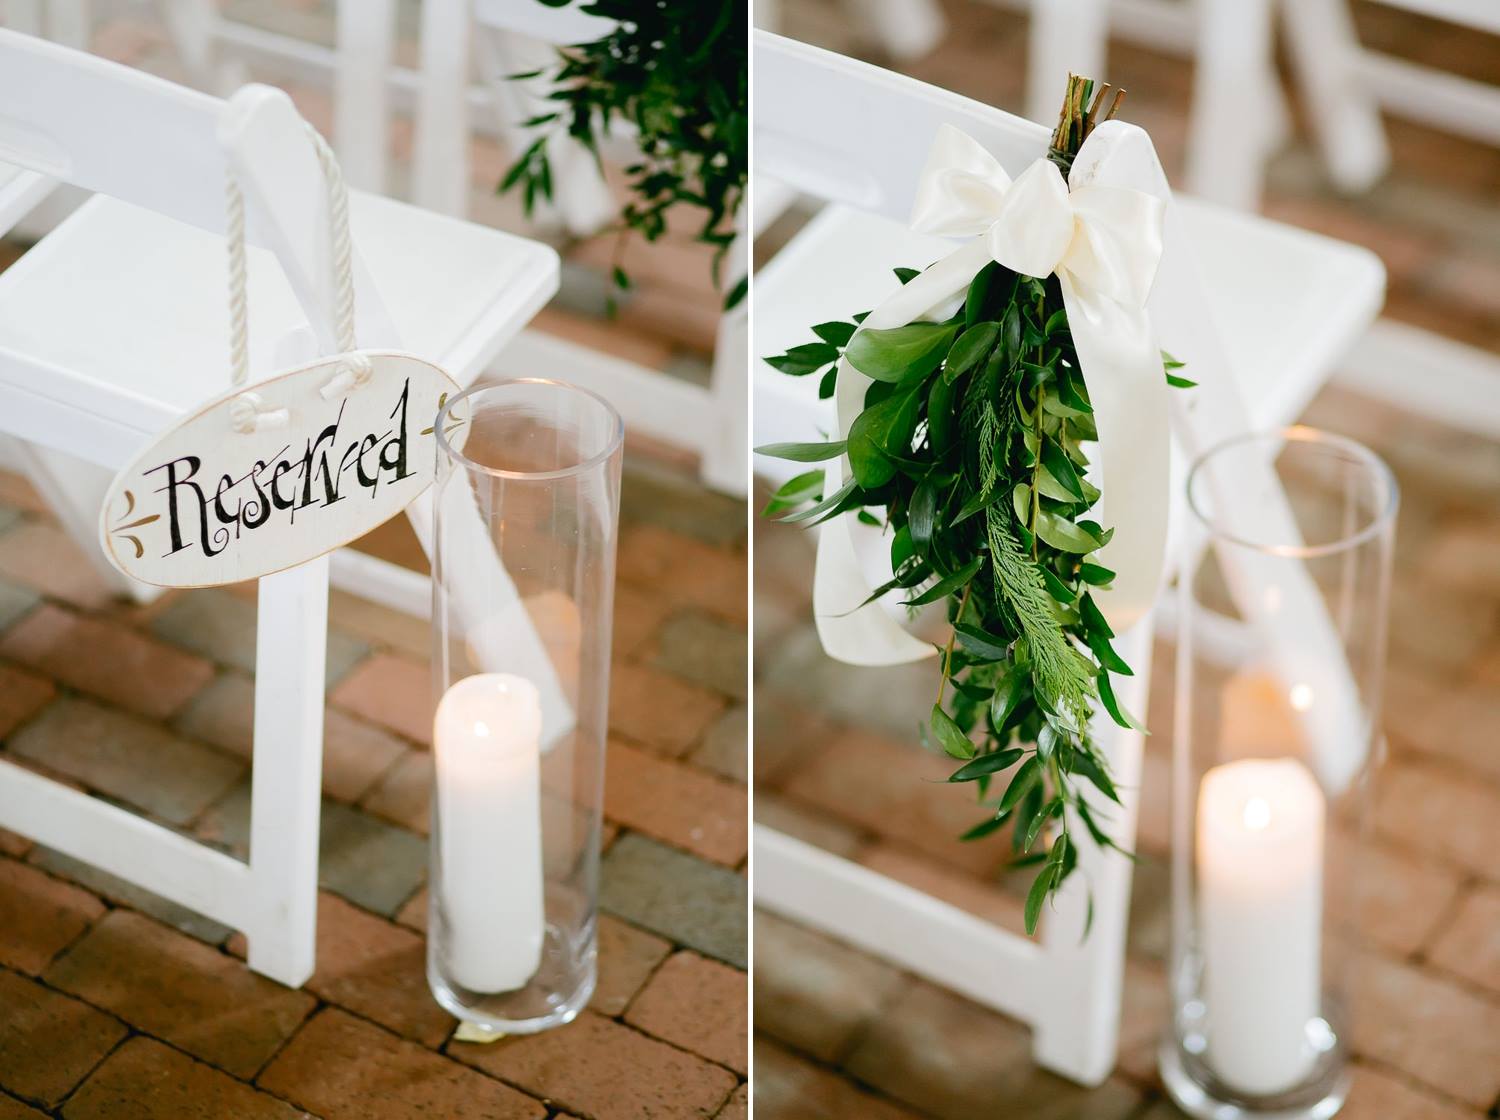 A rustic chic ceremony isn't complete without plenty of greenery and candles. Find out how to use this style for a garden wedding on our blog right now!